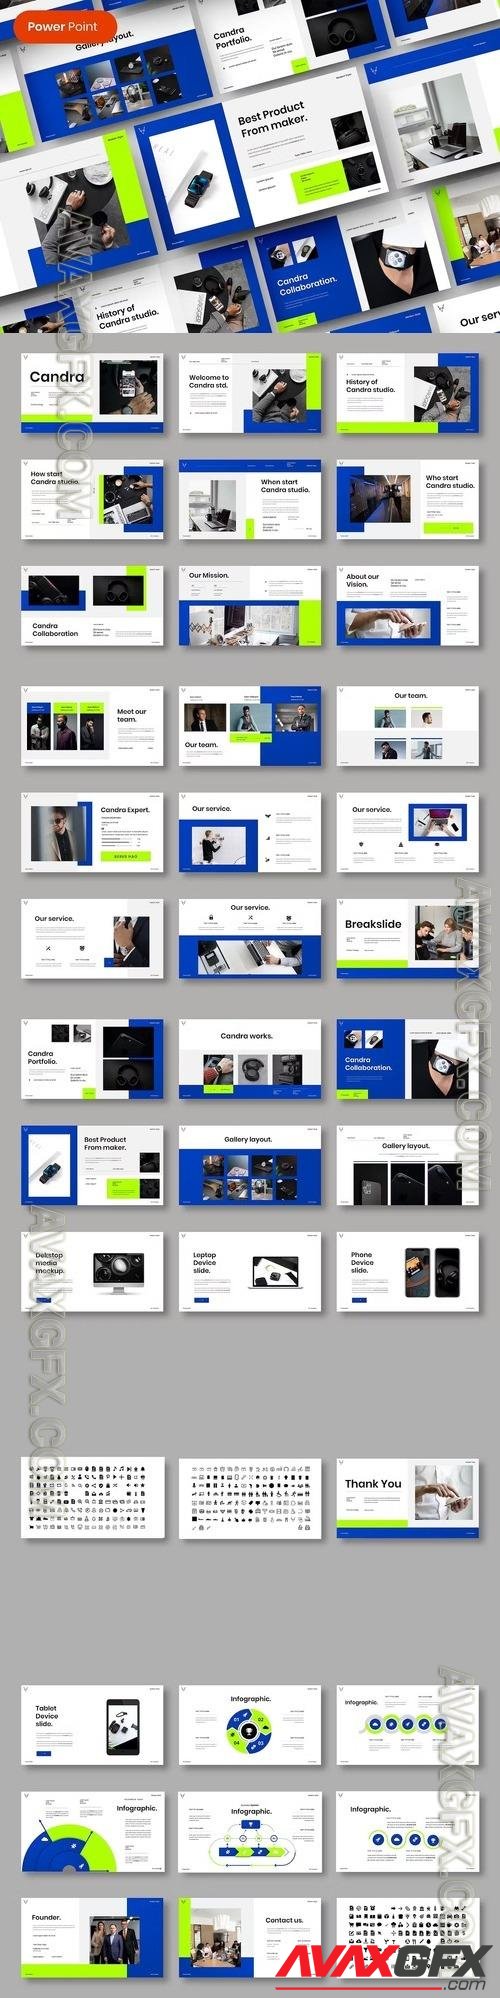 Candra – Business PowerPoint Template [PPTX]